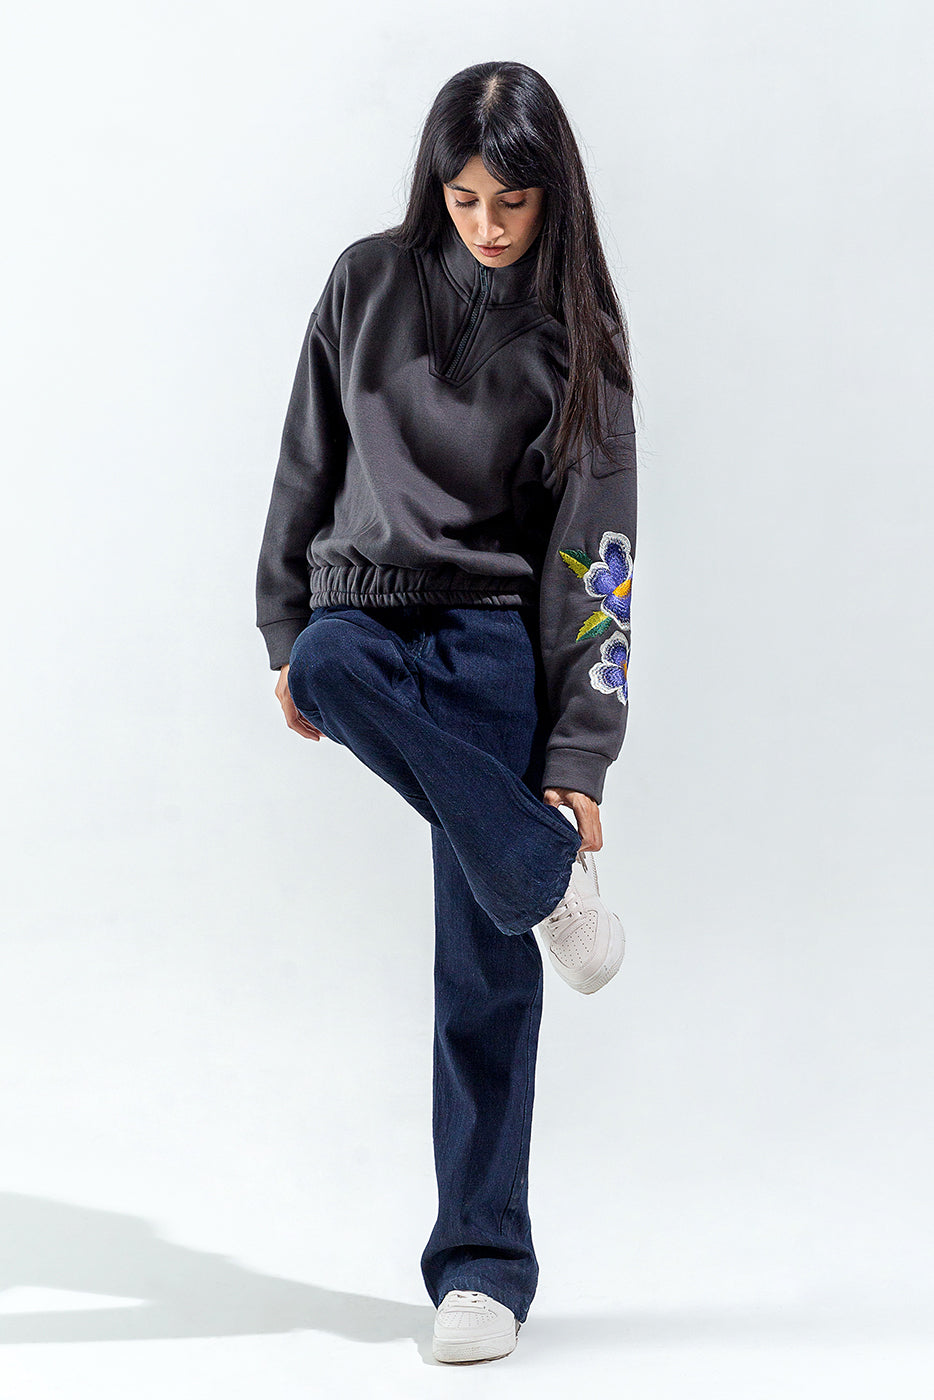 Cropped Embroidered Sweatshirt